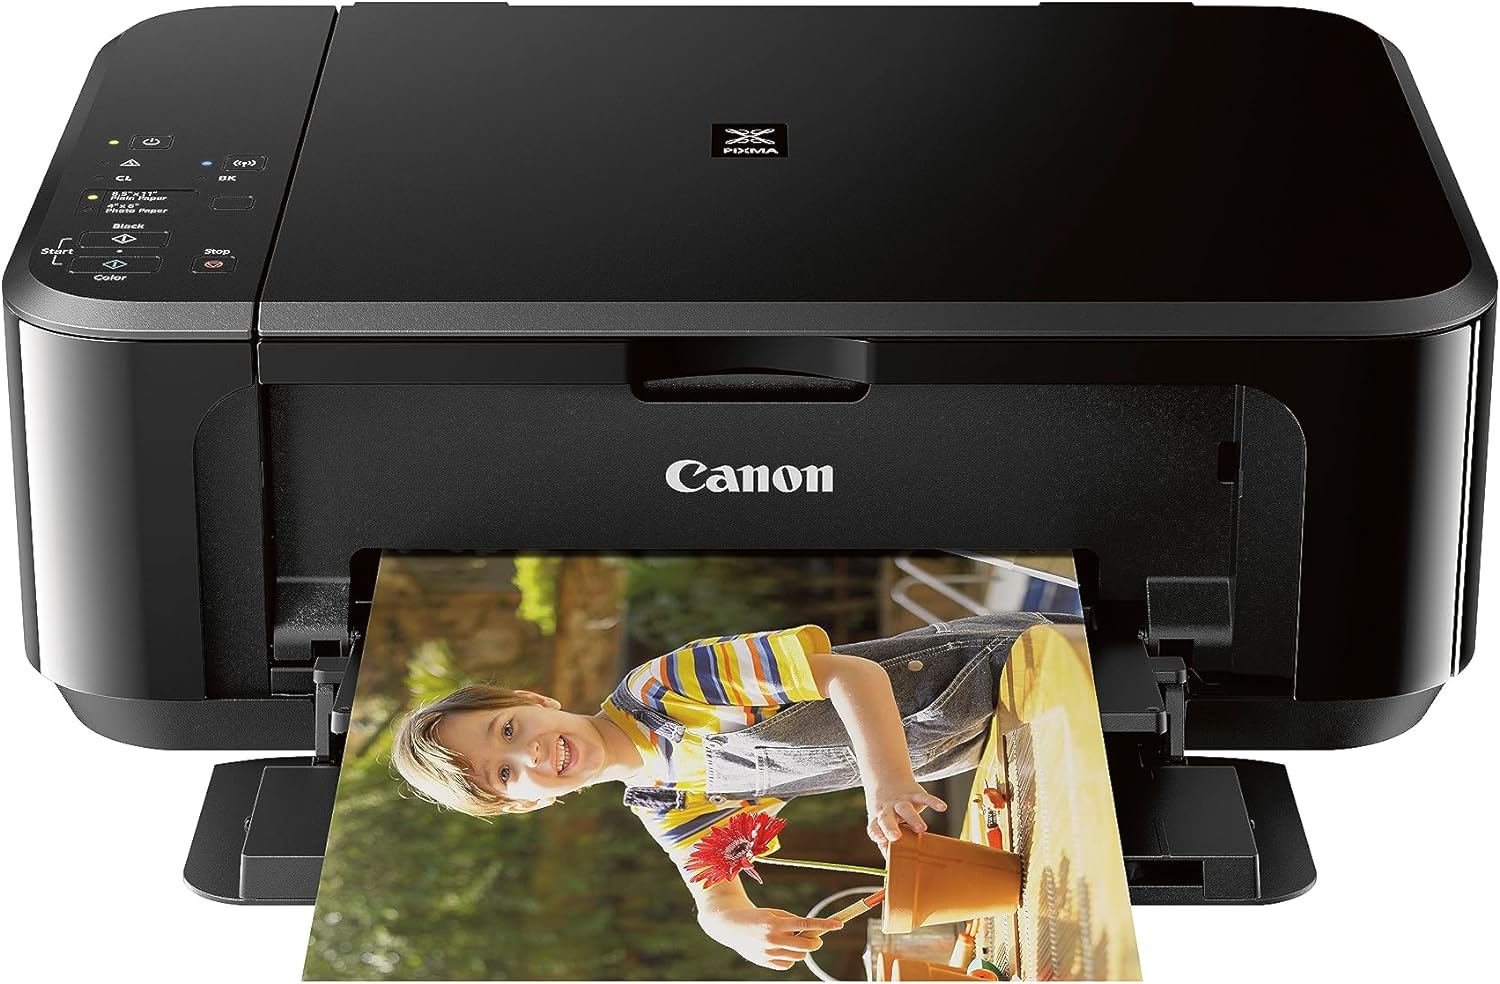 Canon Pixma MG3620 Wireless All-In-One Color Inkjet Printer w/ Mobile & Tablet Printing (Black) $47 + Free Shipping